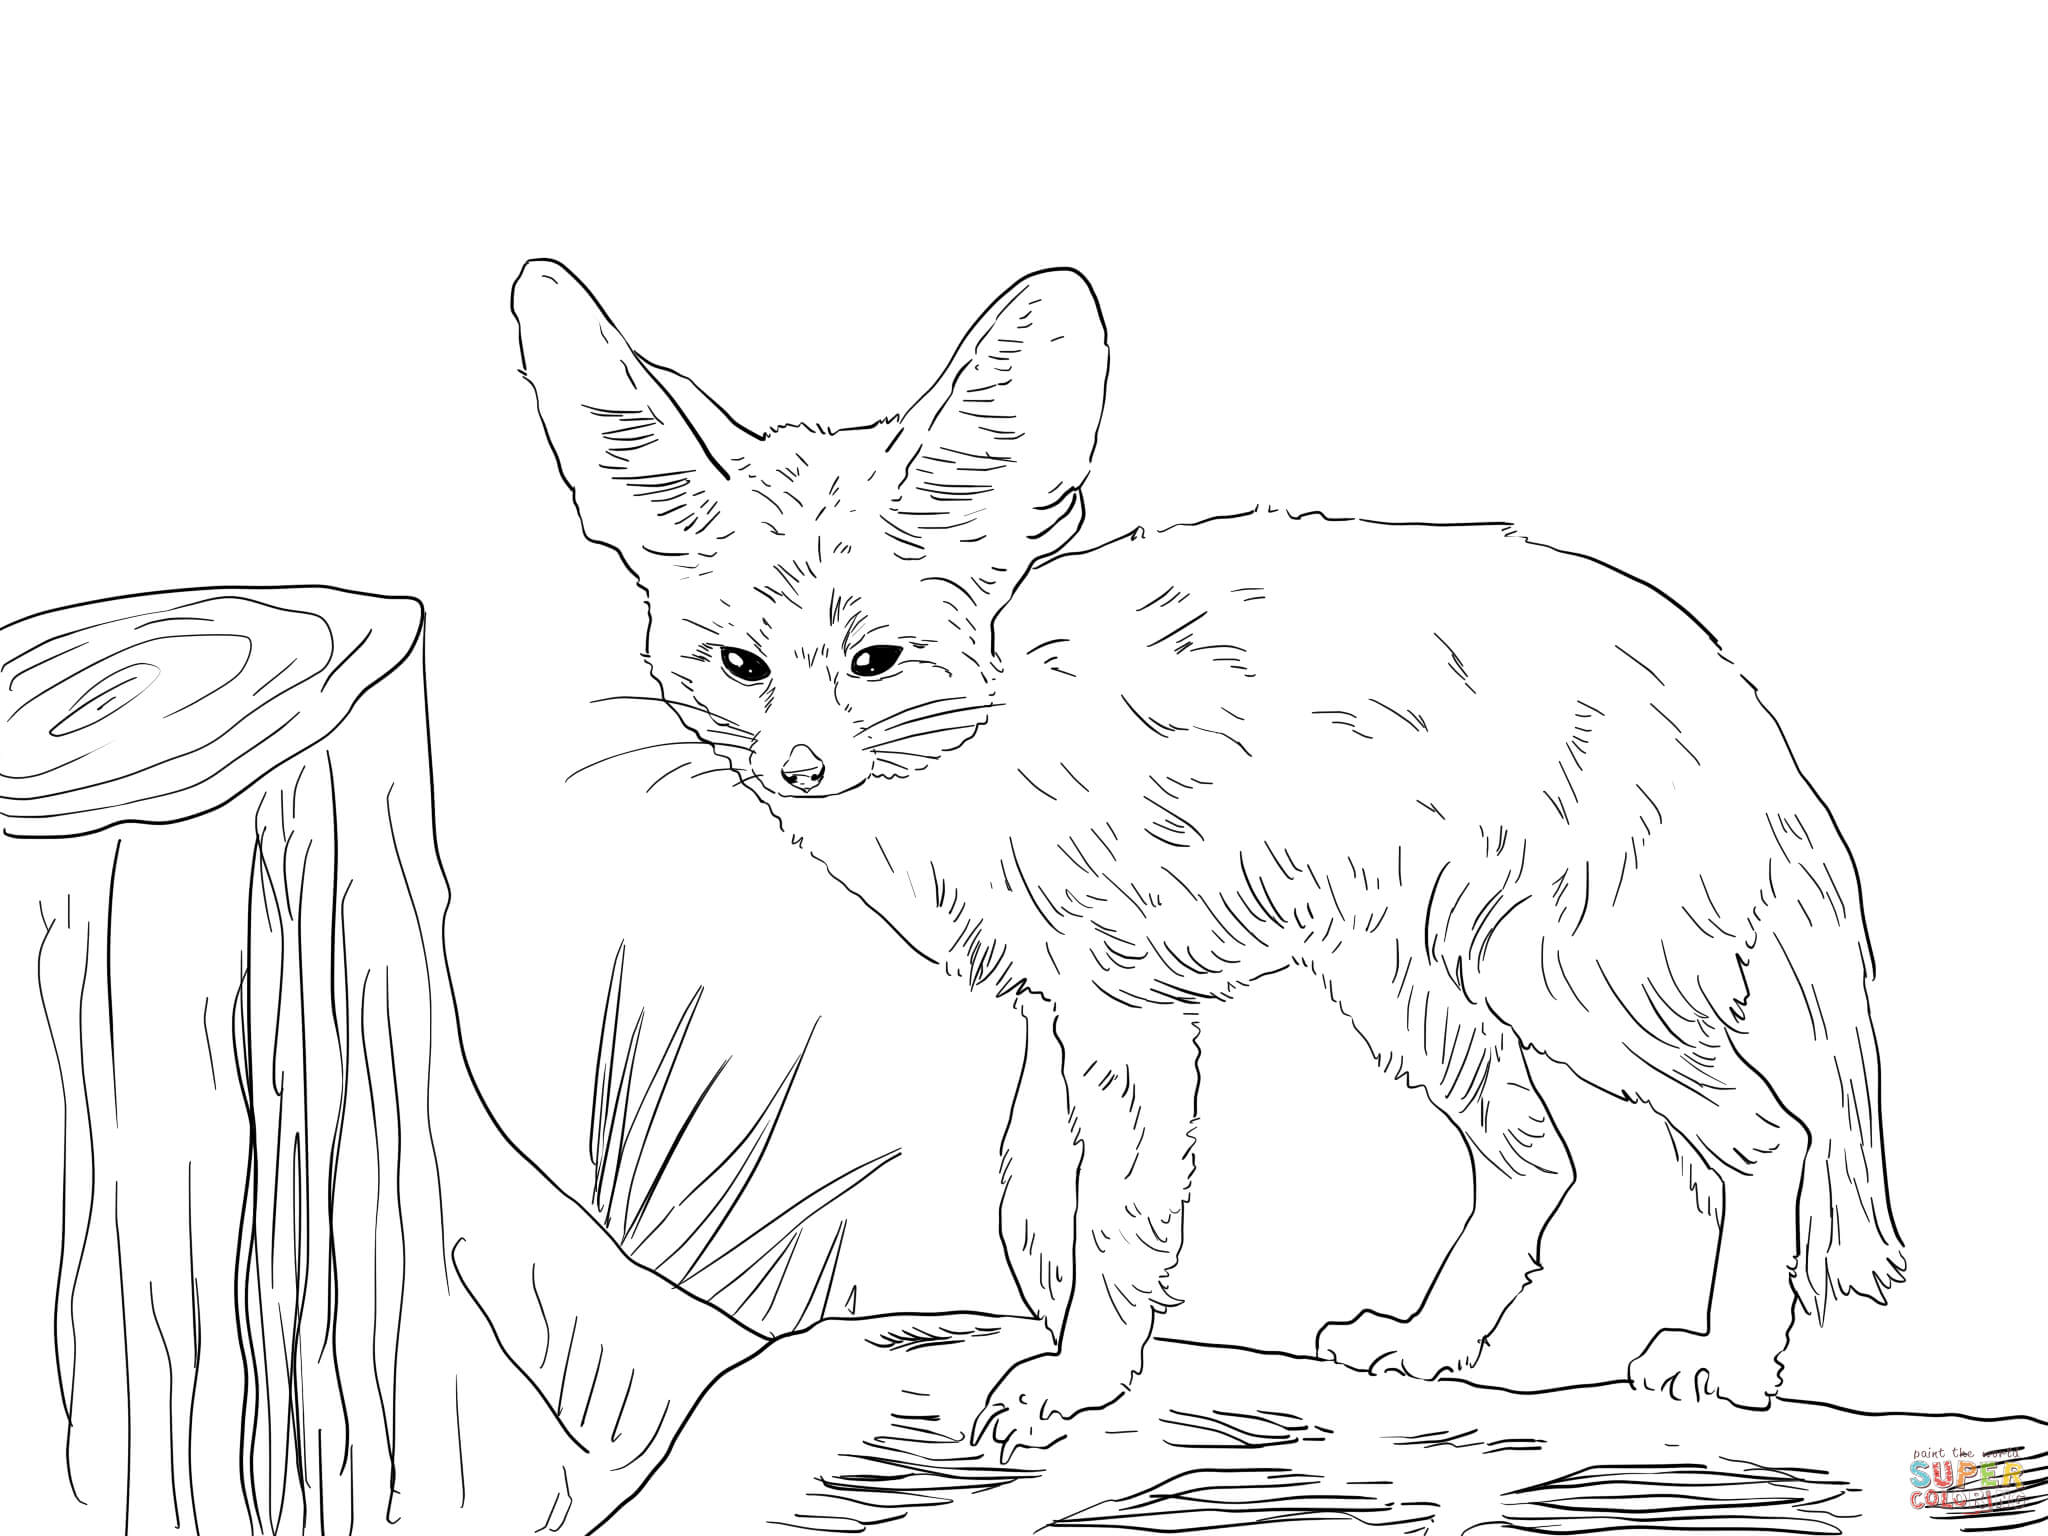 Foxes coloring pages | Free Coloring Pages